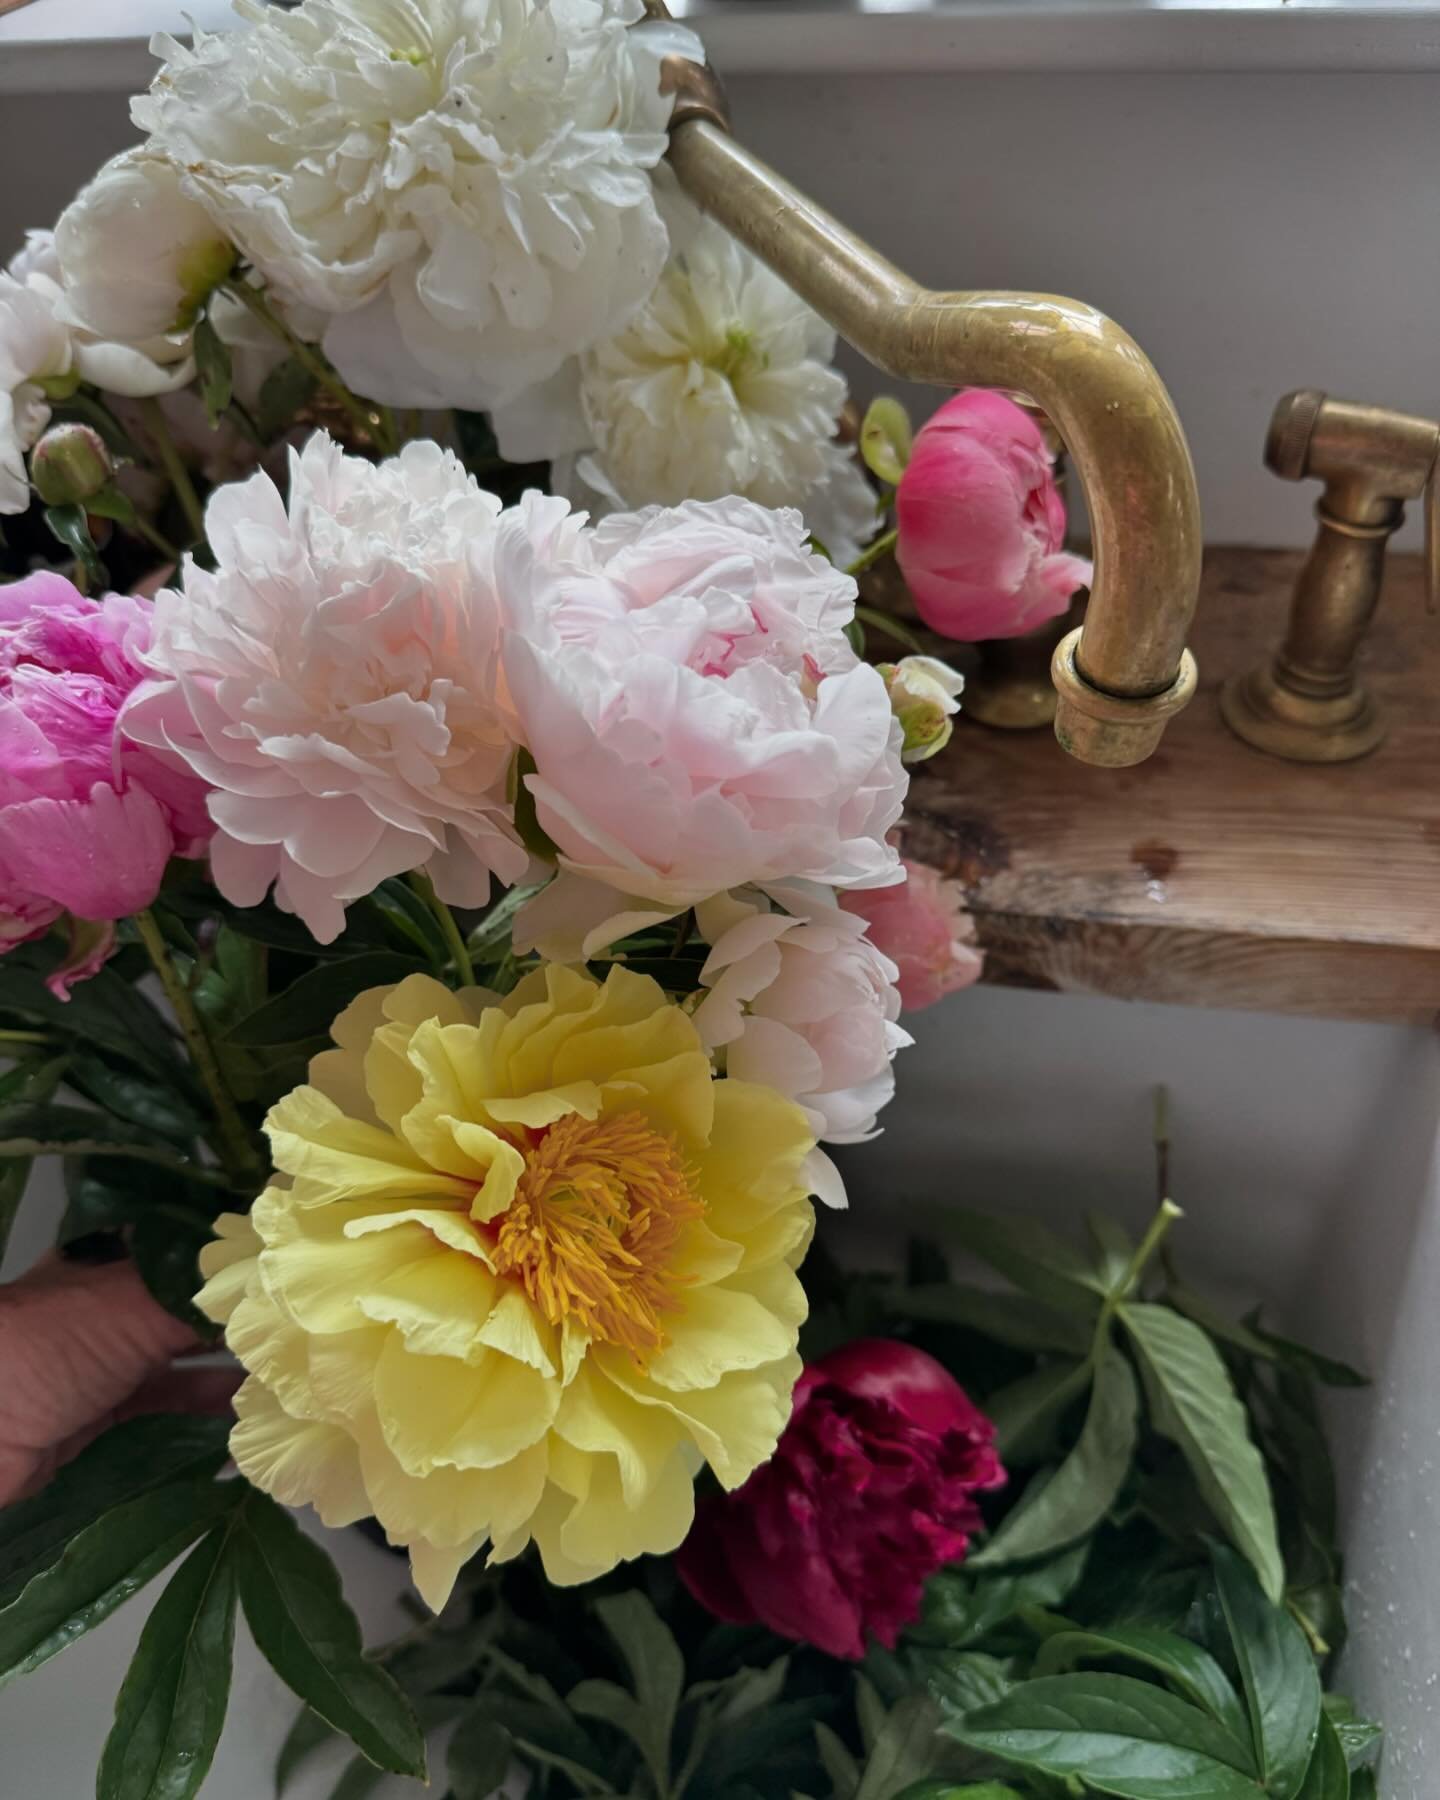 Peonies are always a good way to dress up a kitchen sink and add a lovely scent!! 
.
.
.
#peonies #flowerfarm #farm #flowers